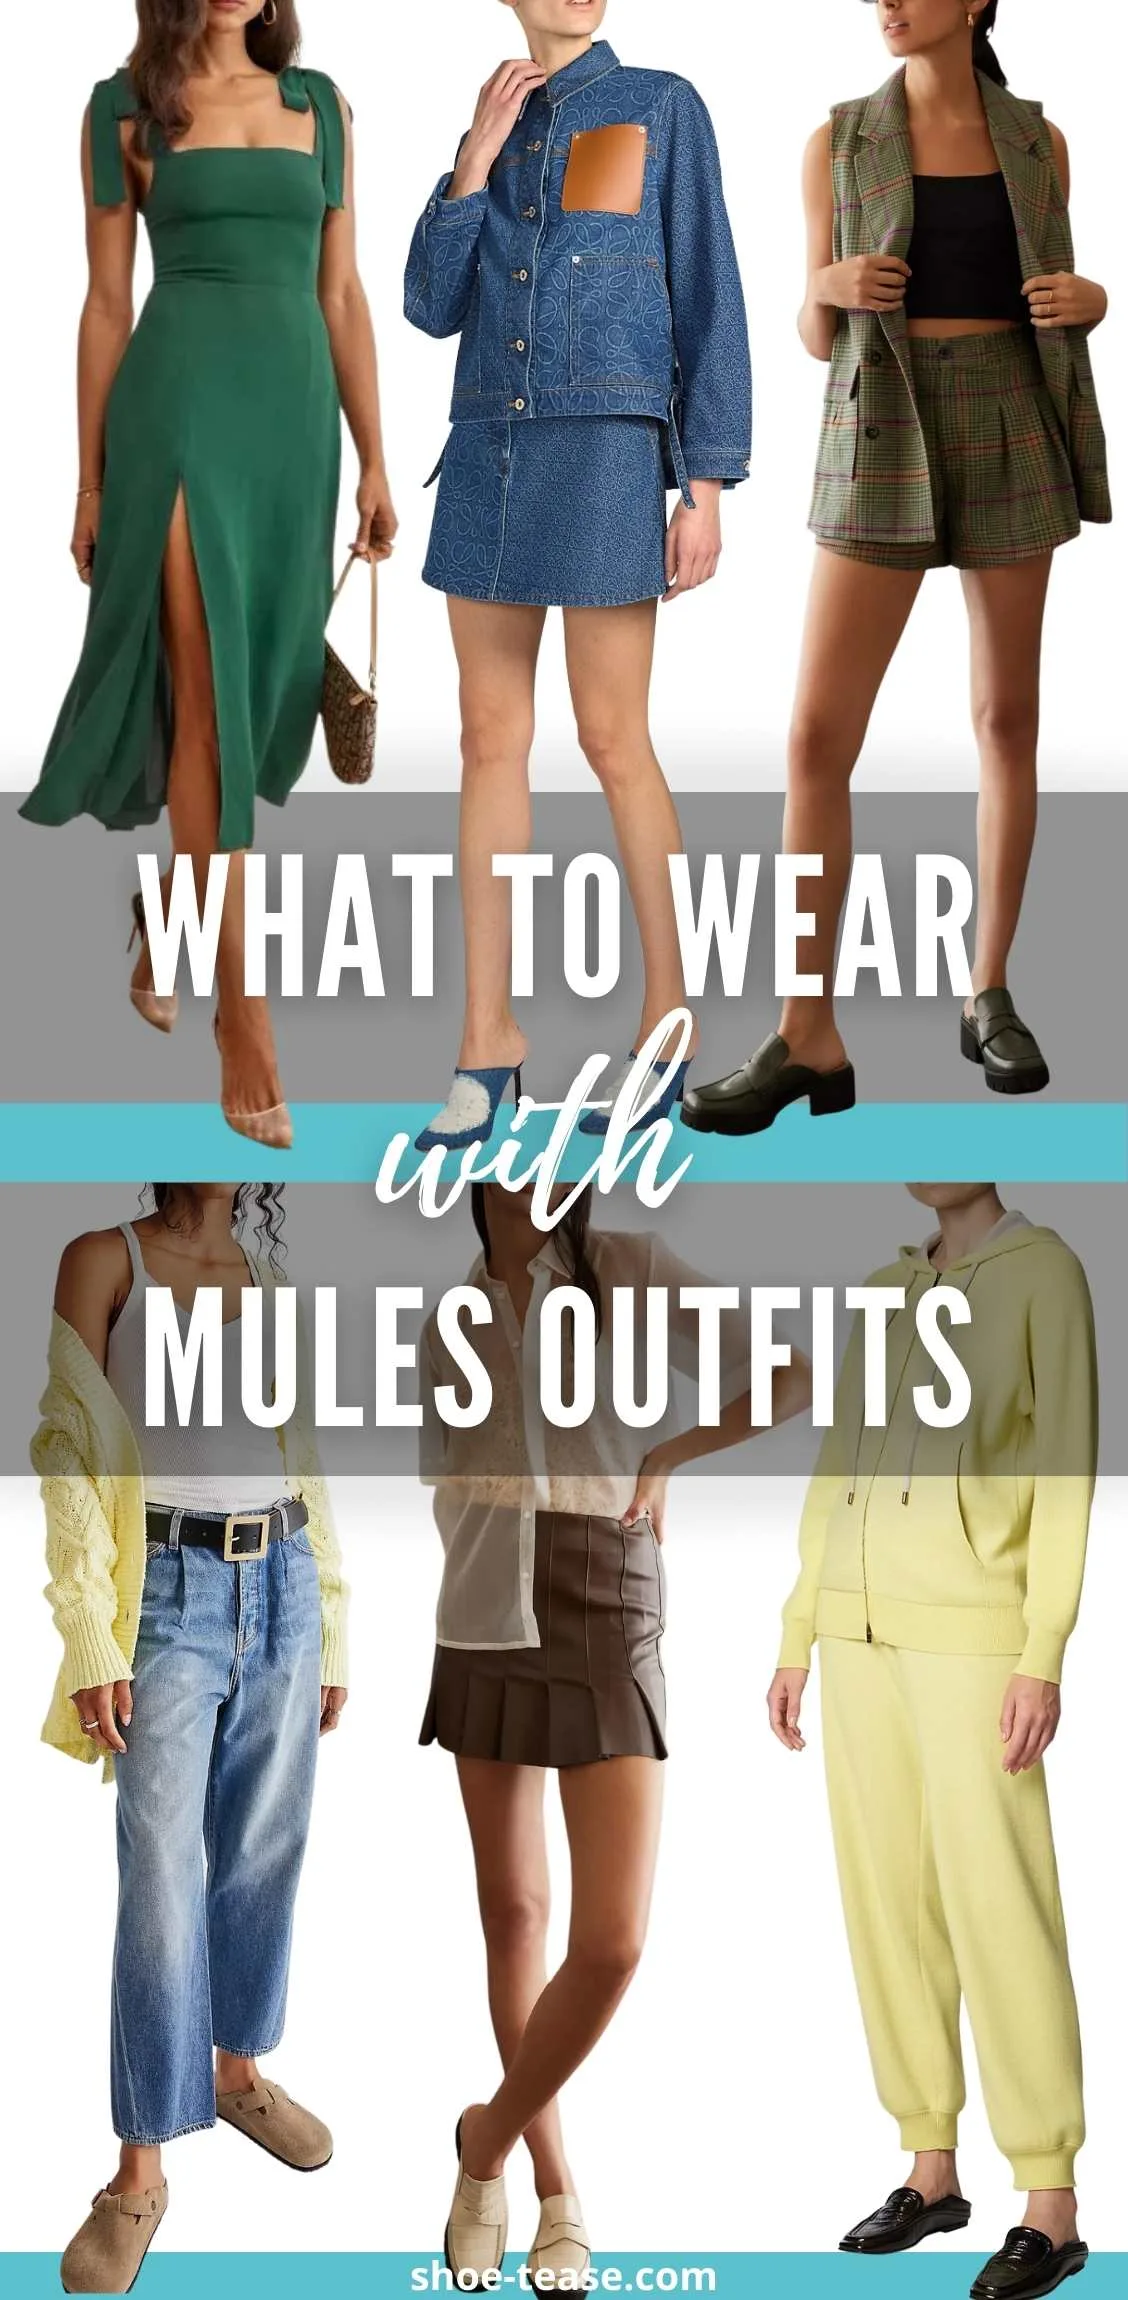 White text reading what to wear with mules outfits over collage of 6 women wearing different outfits with mules.